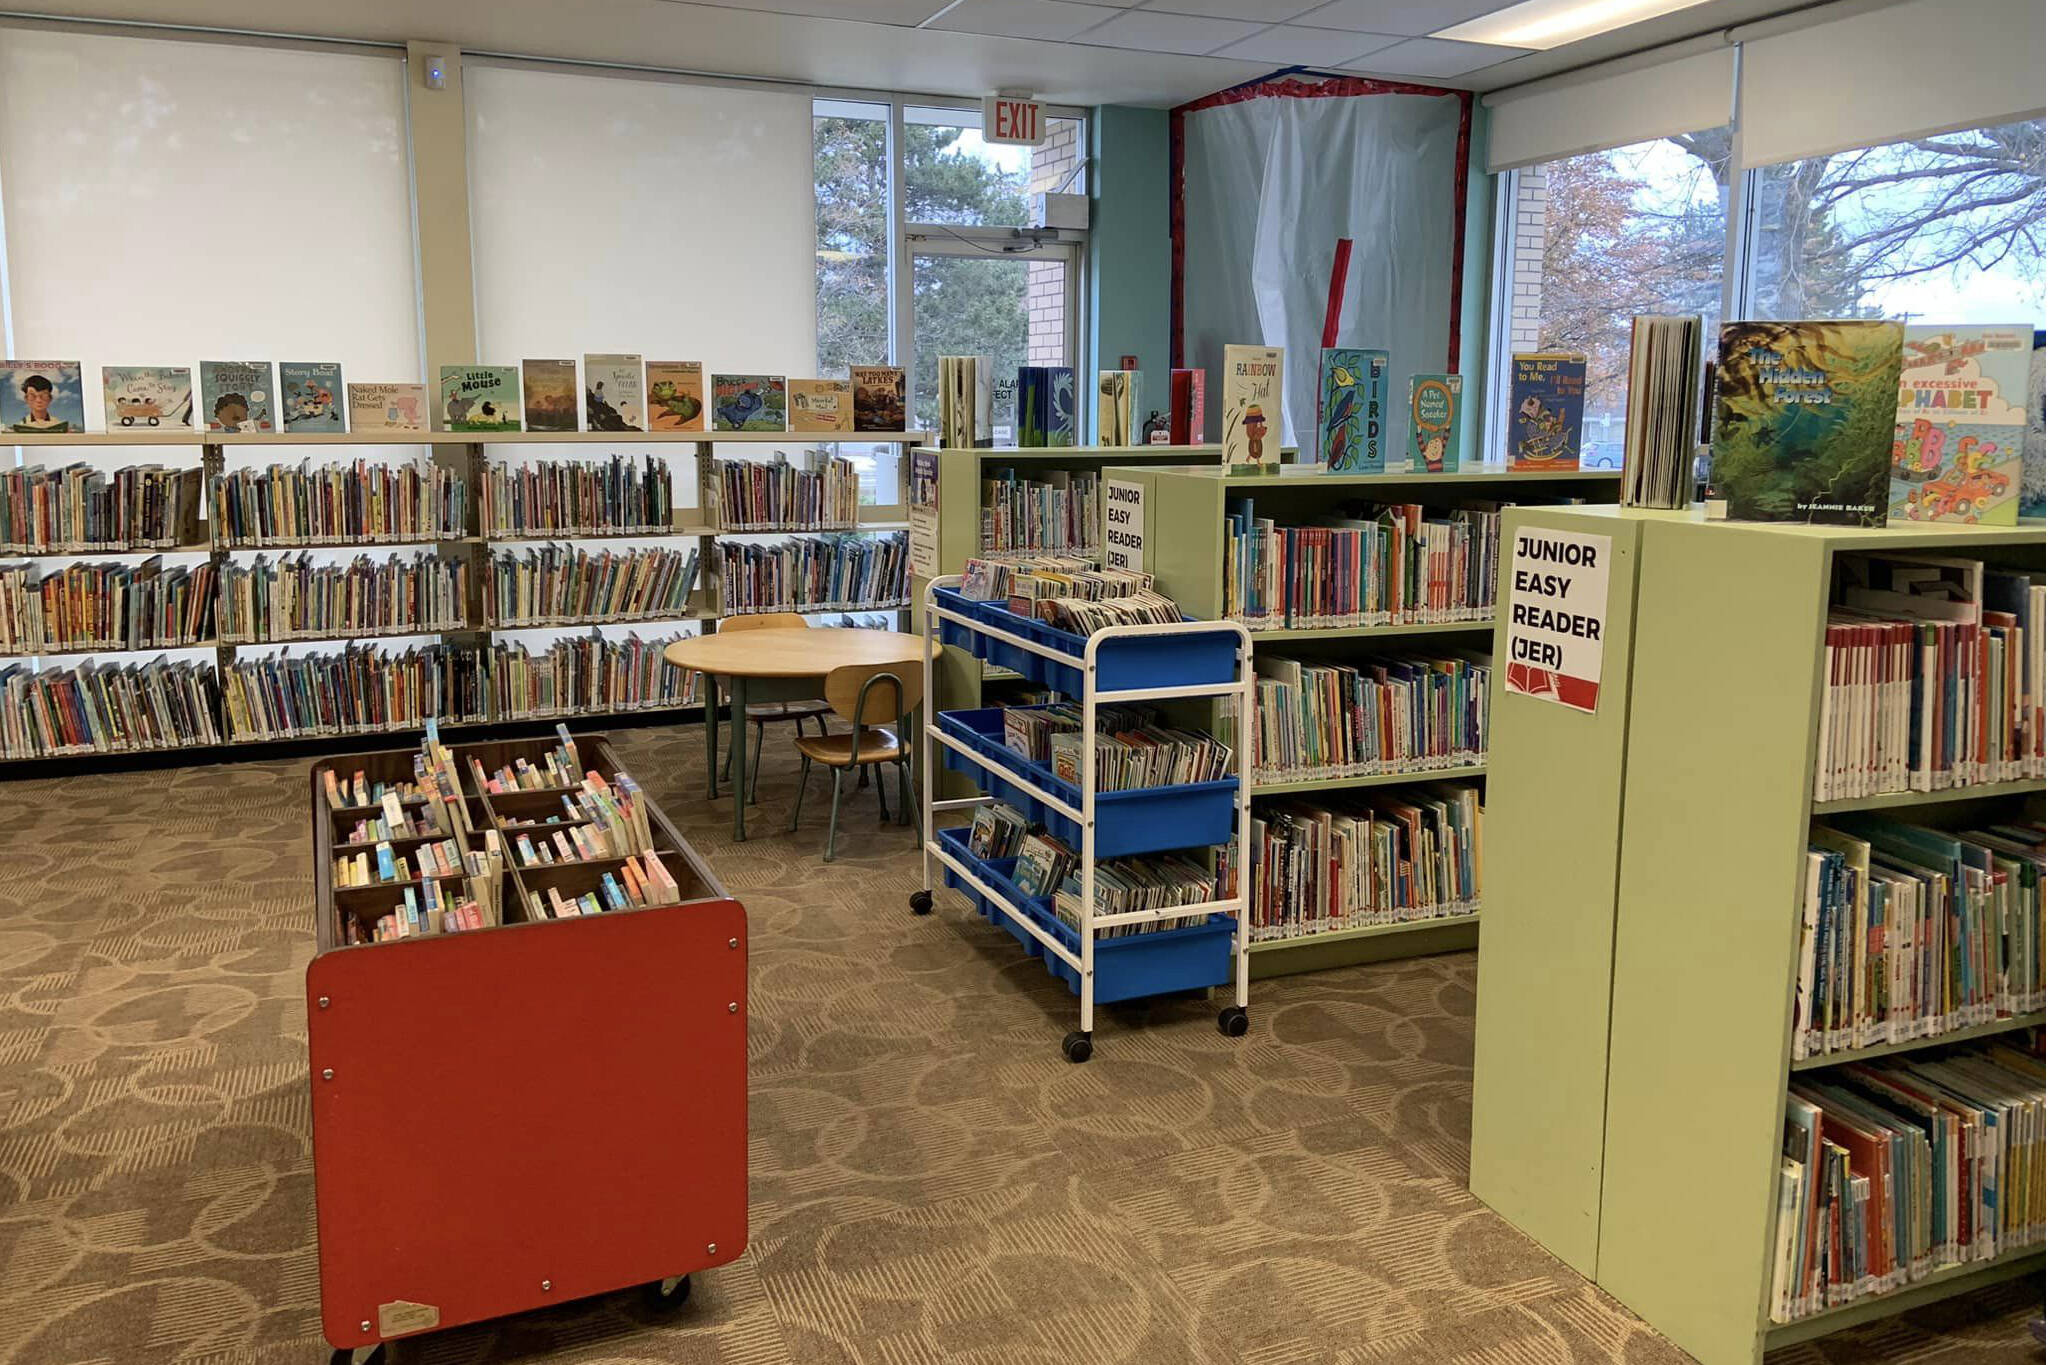 This is the children's library in Penticton on Jan. 2, looking much drier and as good as new, said library staff on Facebook. (Facebook)